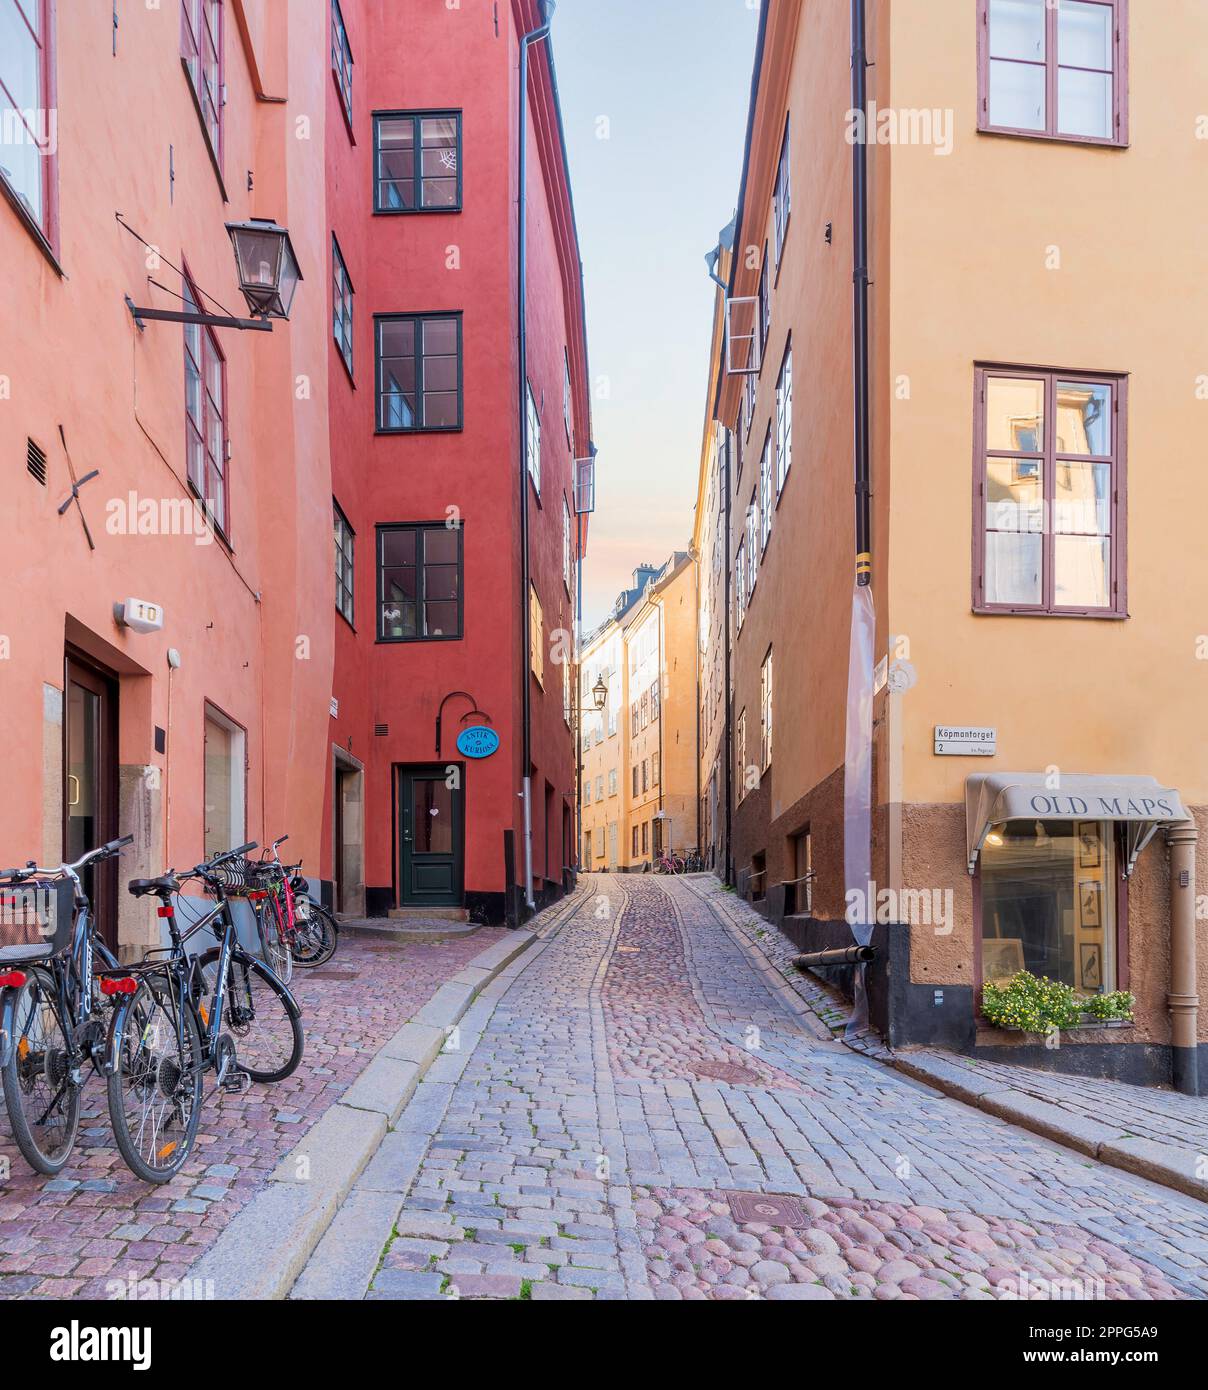 Narrow alley in Gamla stan, the old town of Stockholm, Sweden with old style colorful houses and cobblestone street Stock Photo